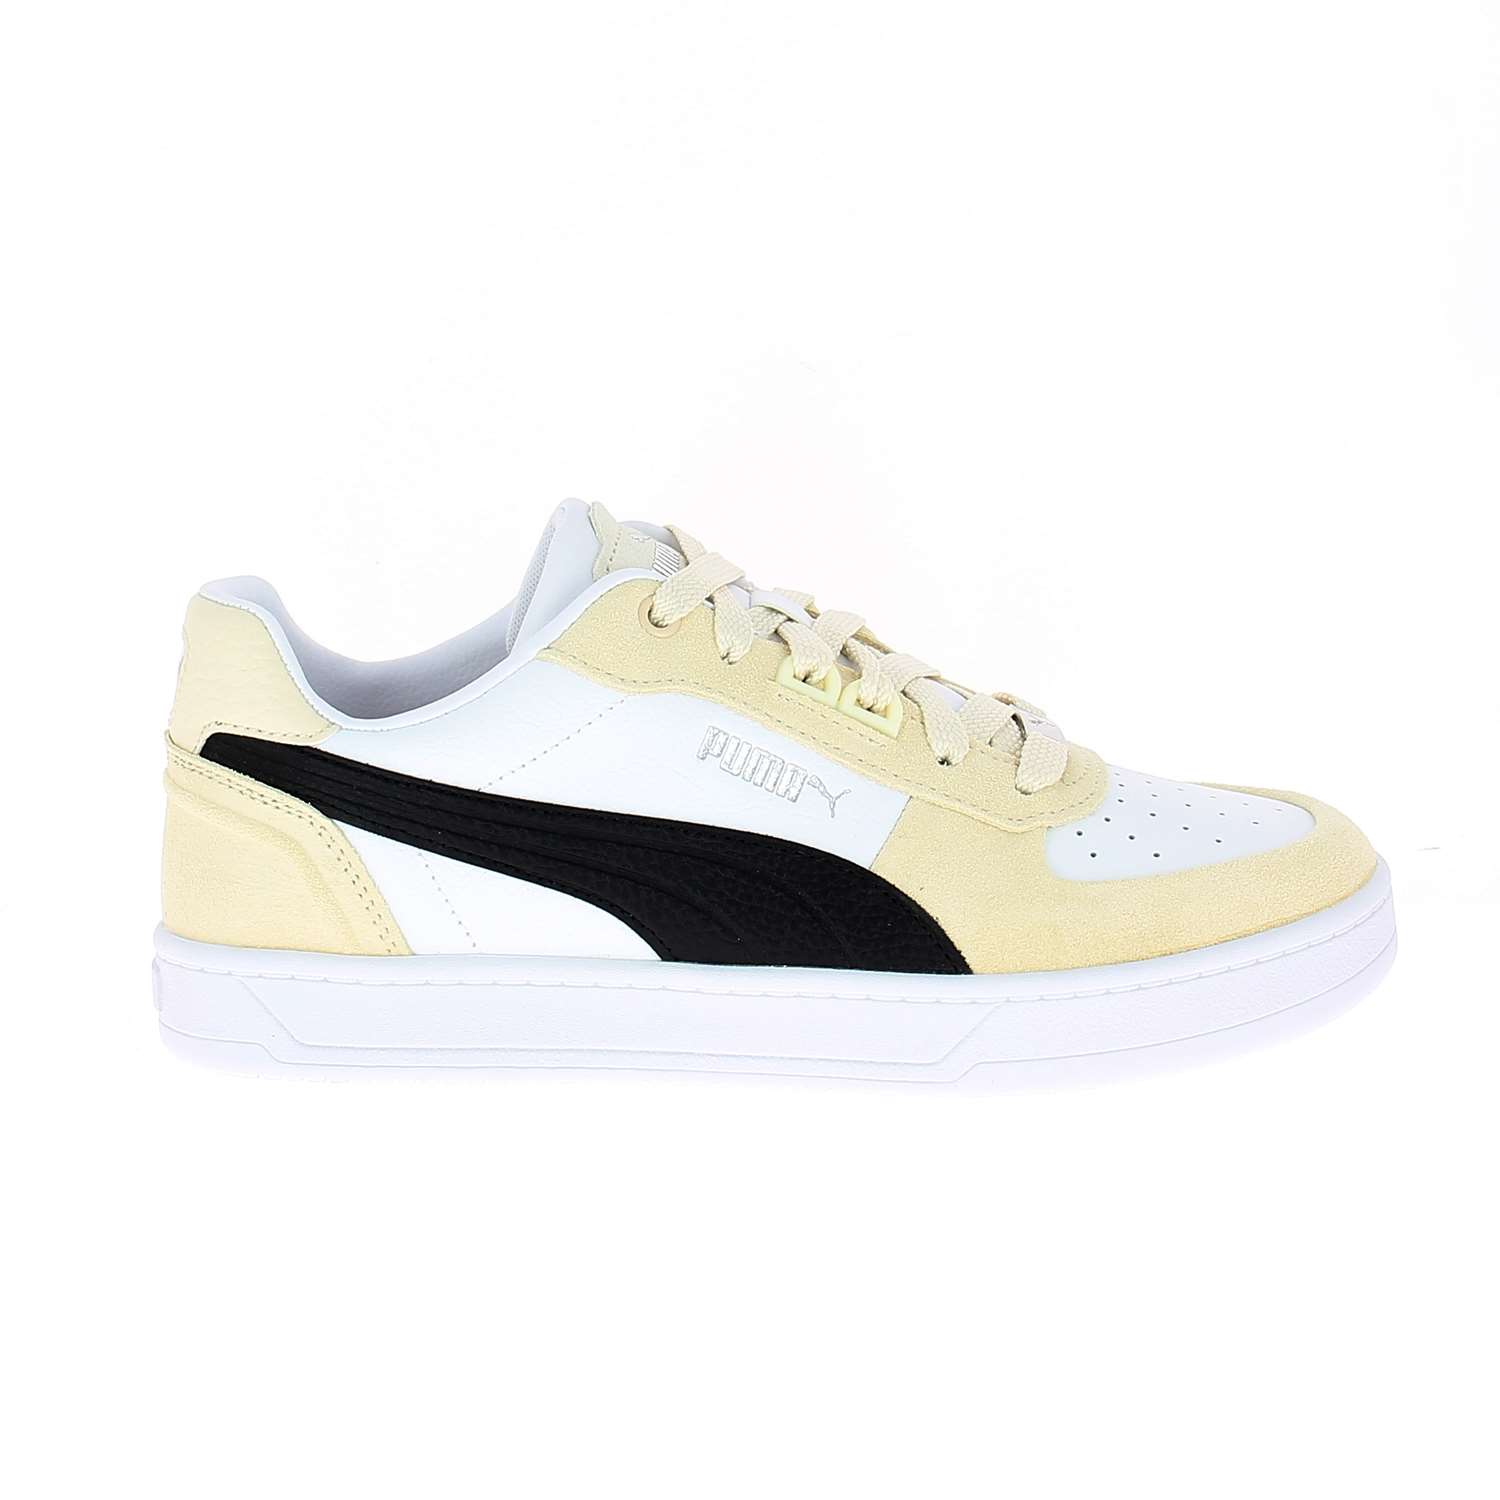 02 - CAVEN 2 LUXE - PUMA -  - Synthétique